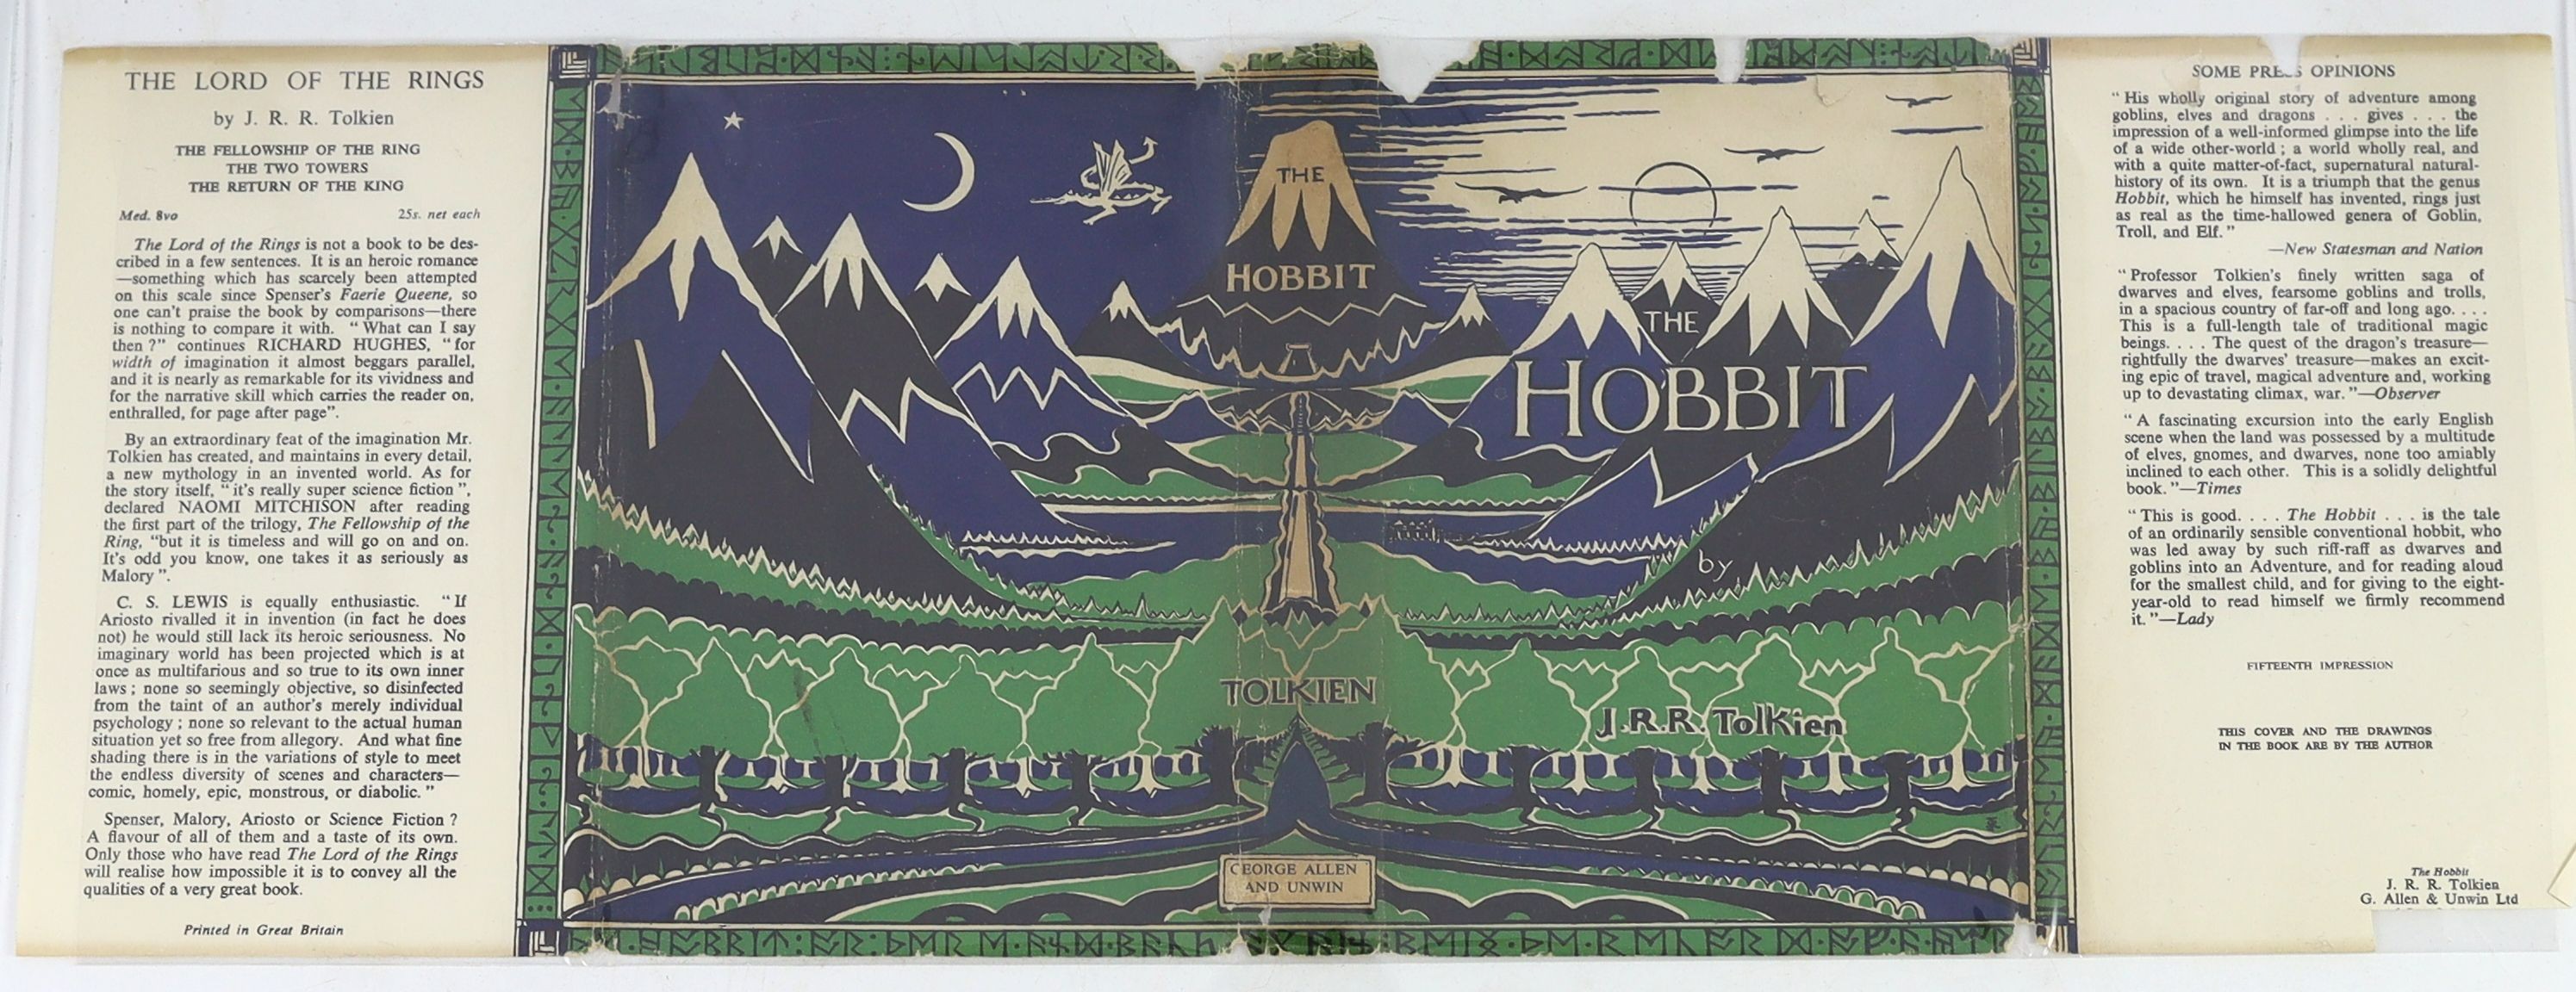 ° ° Tolkien, John Ronald Reuel - The Hobbit, 2nd edition, 15th impression, map endpapers, original - Image 4 of 4